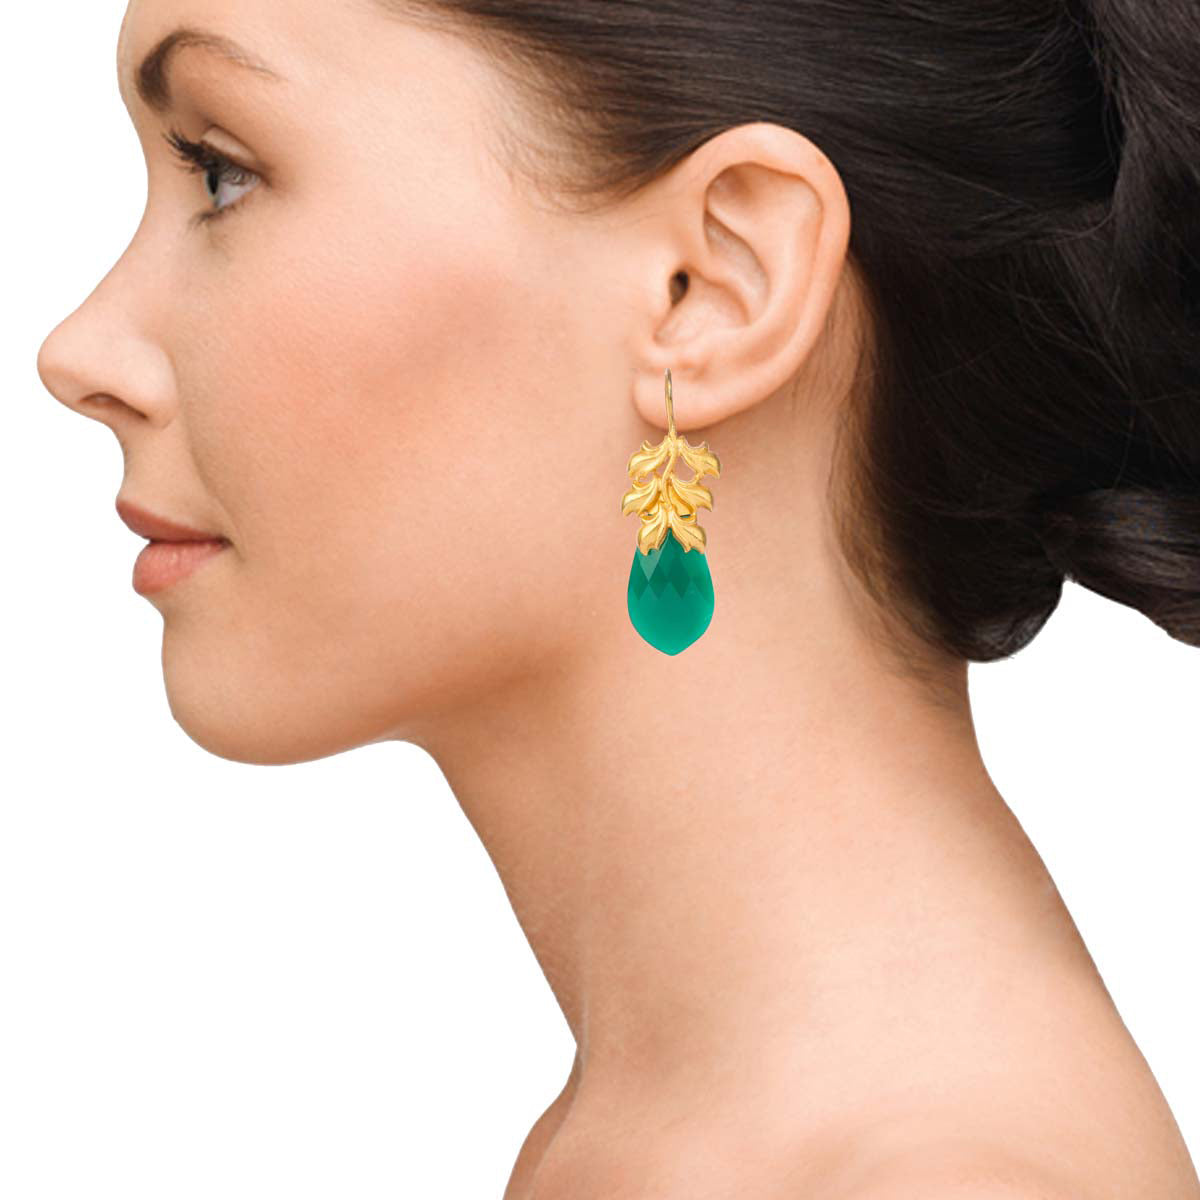 Gold Earrings With Green Drops